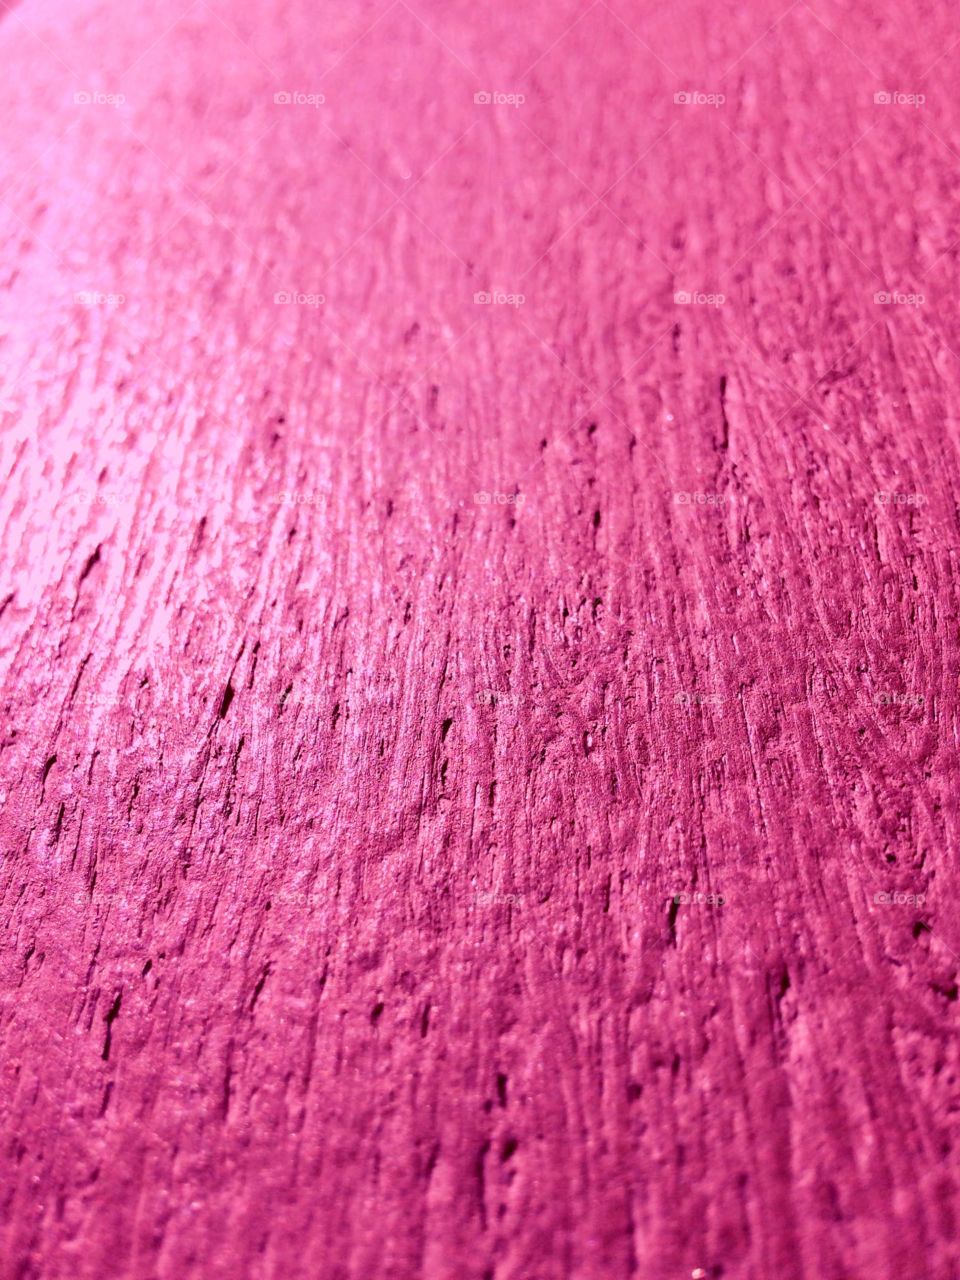 Backgrounds of pink wood